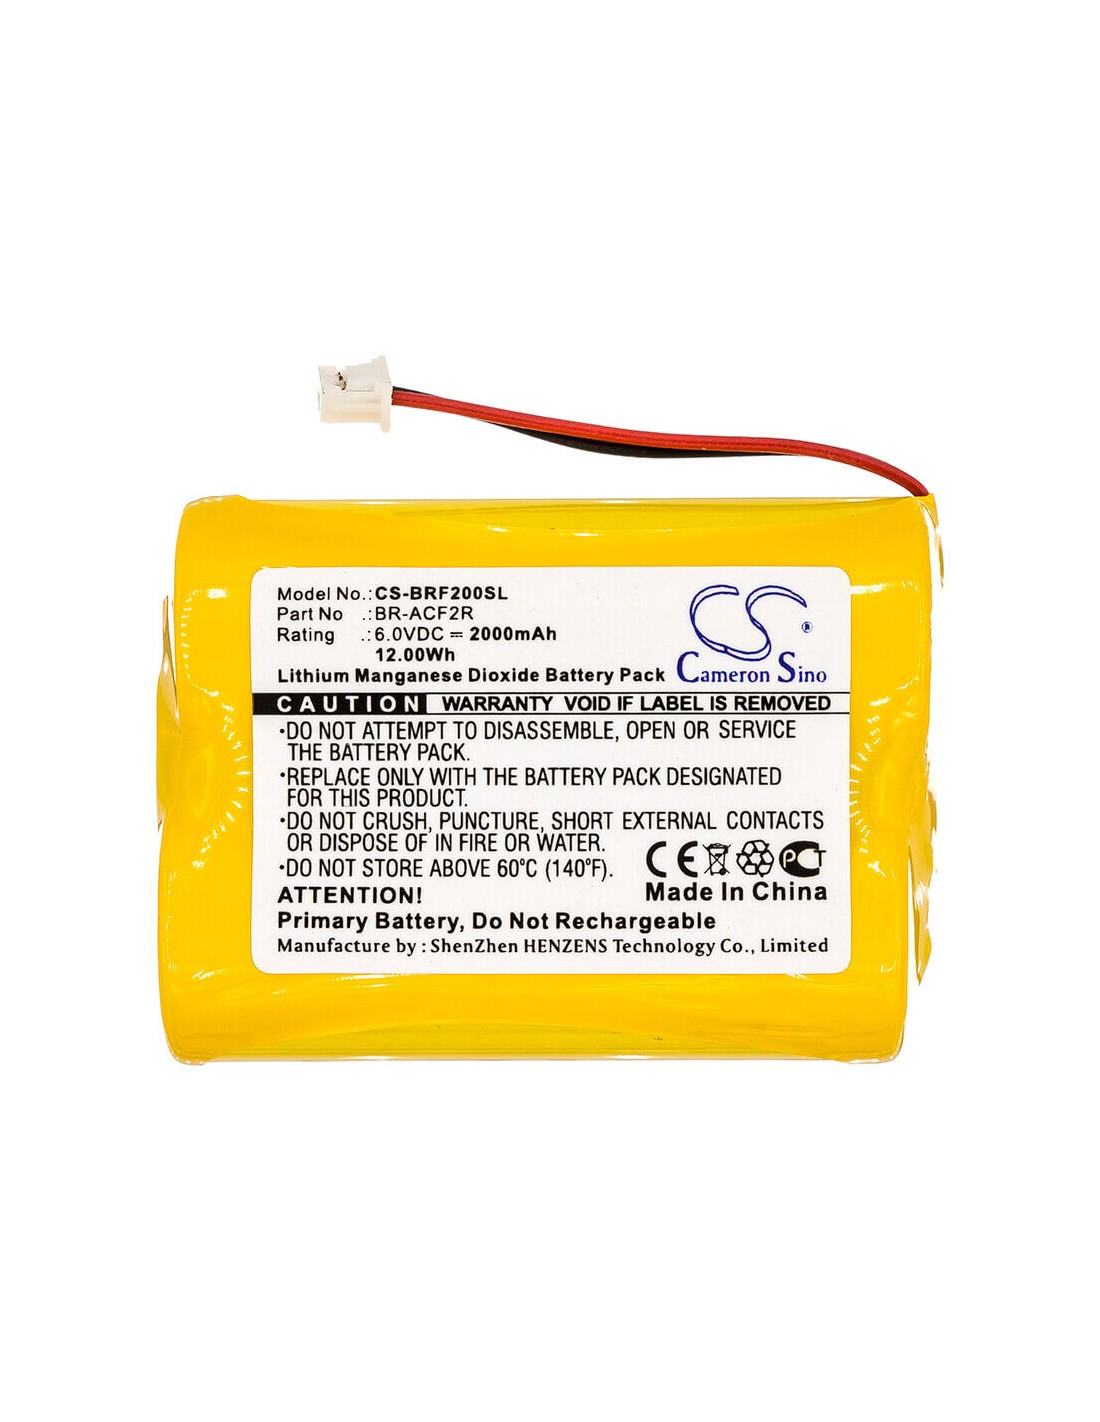 Battery for Panasonic, Br-acf2r, Note, Primary Battery 6V, 2000mAh - 12.00Wh